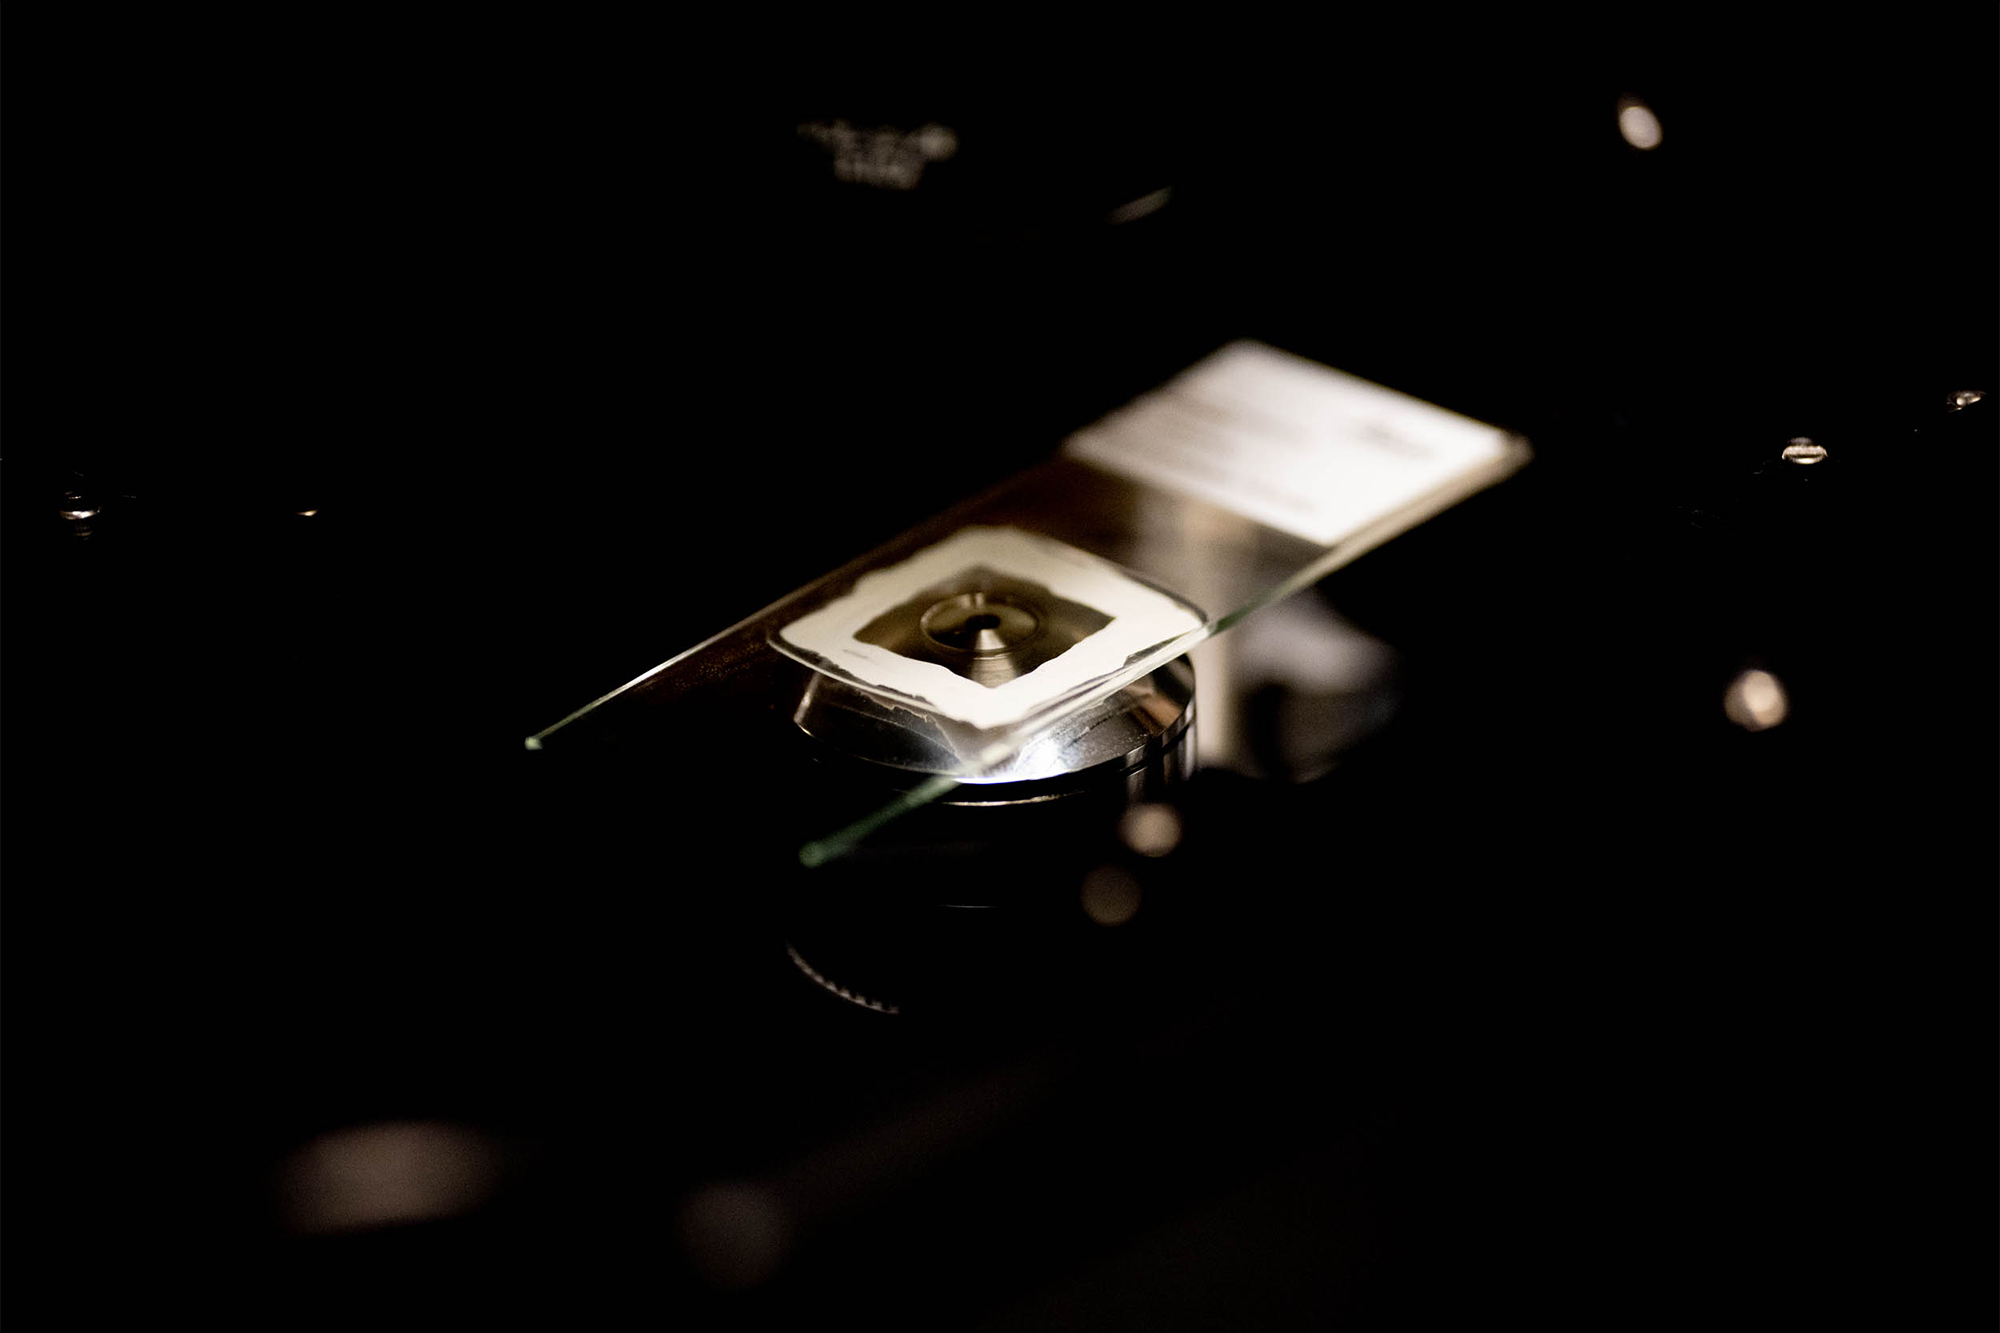 A glass slide is visible on a dark background